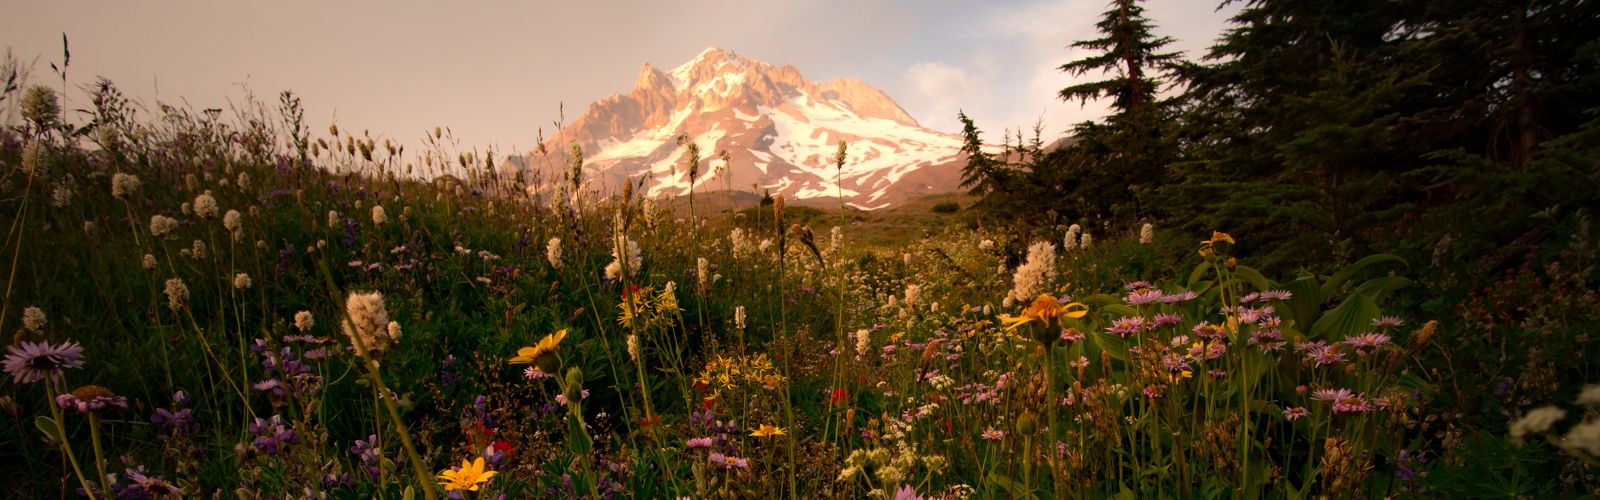 A closeup view of wildflowers in a field with Mt. Hood in the background.